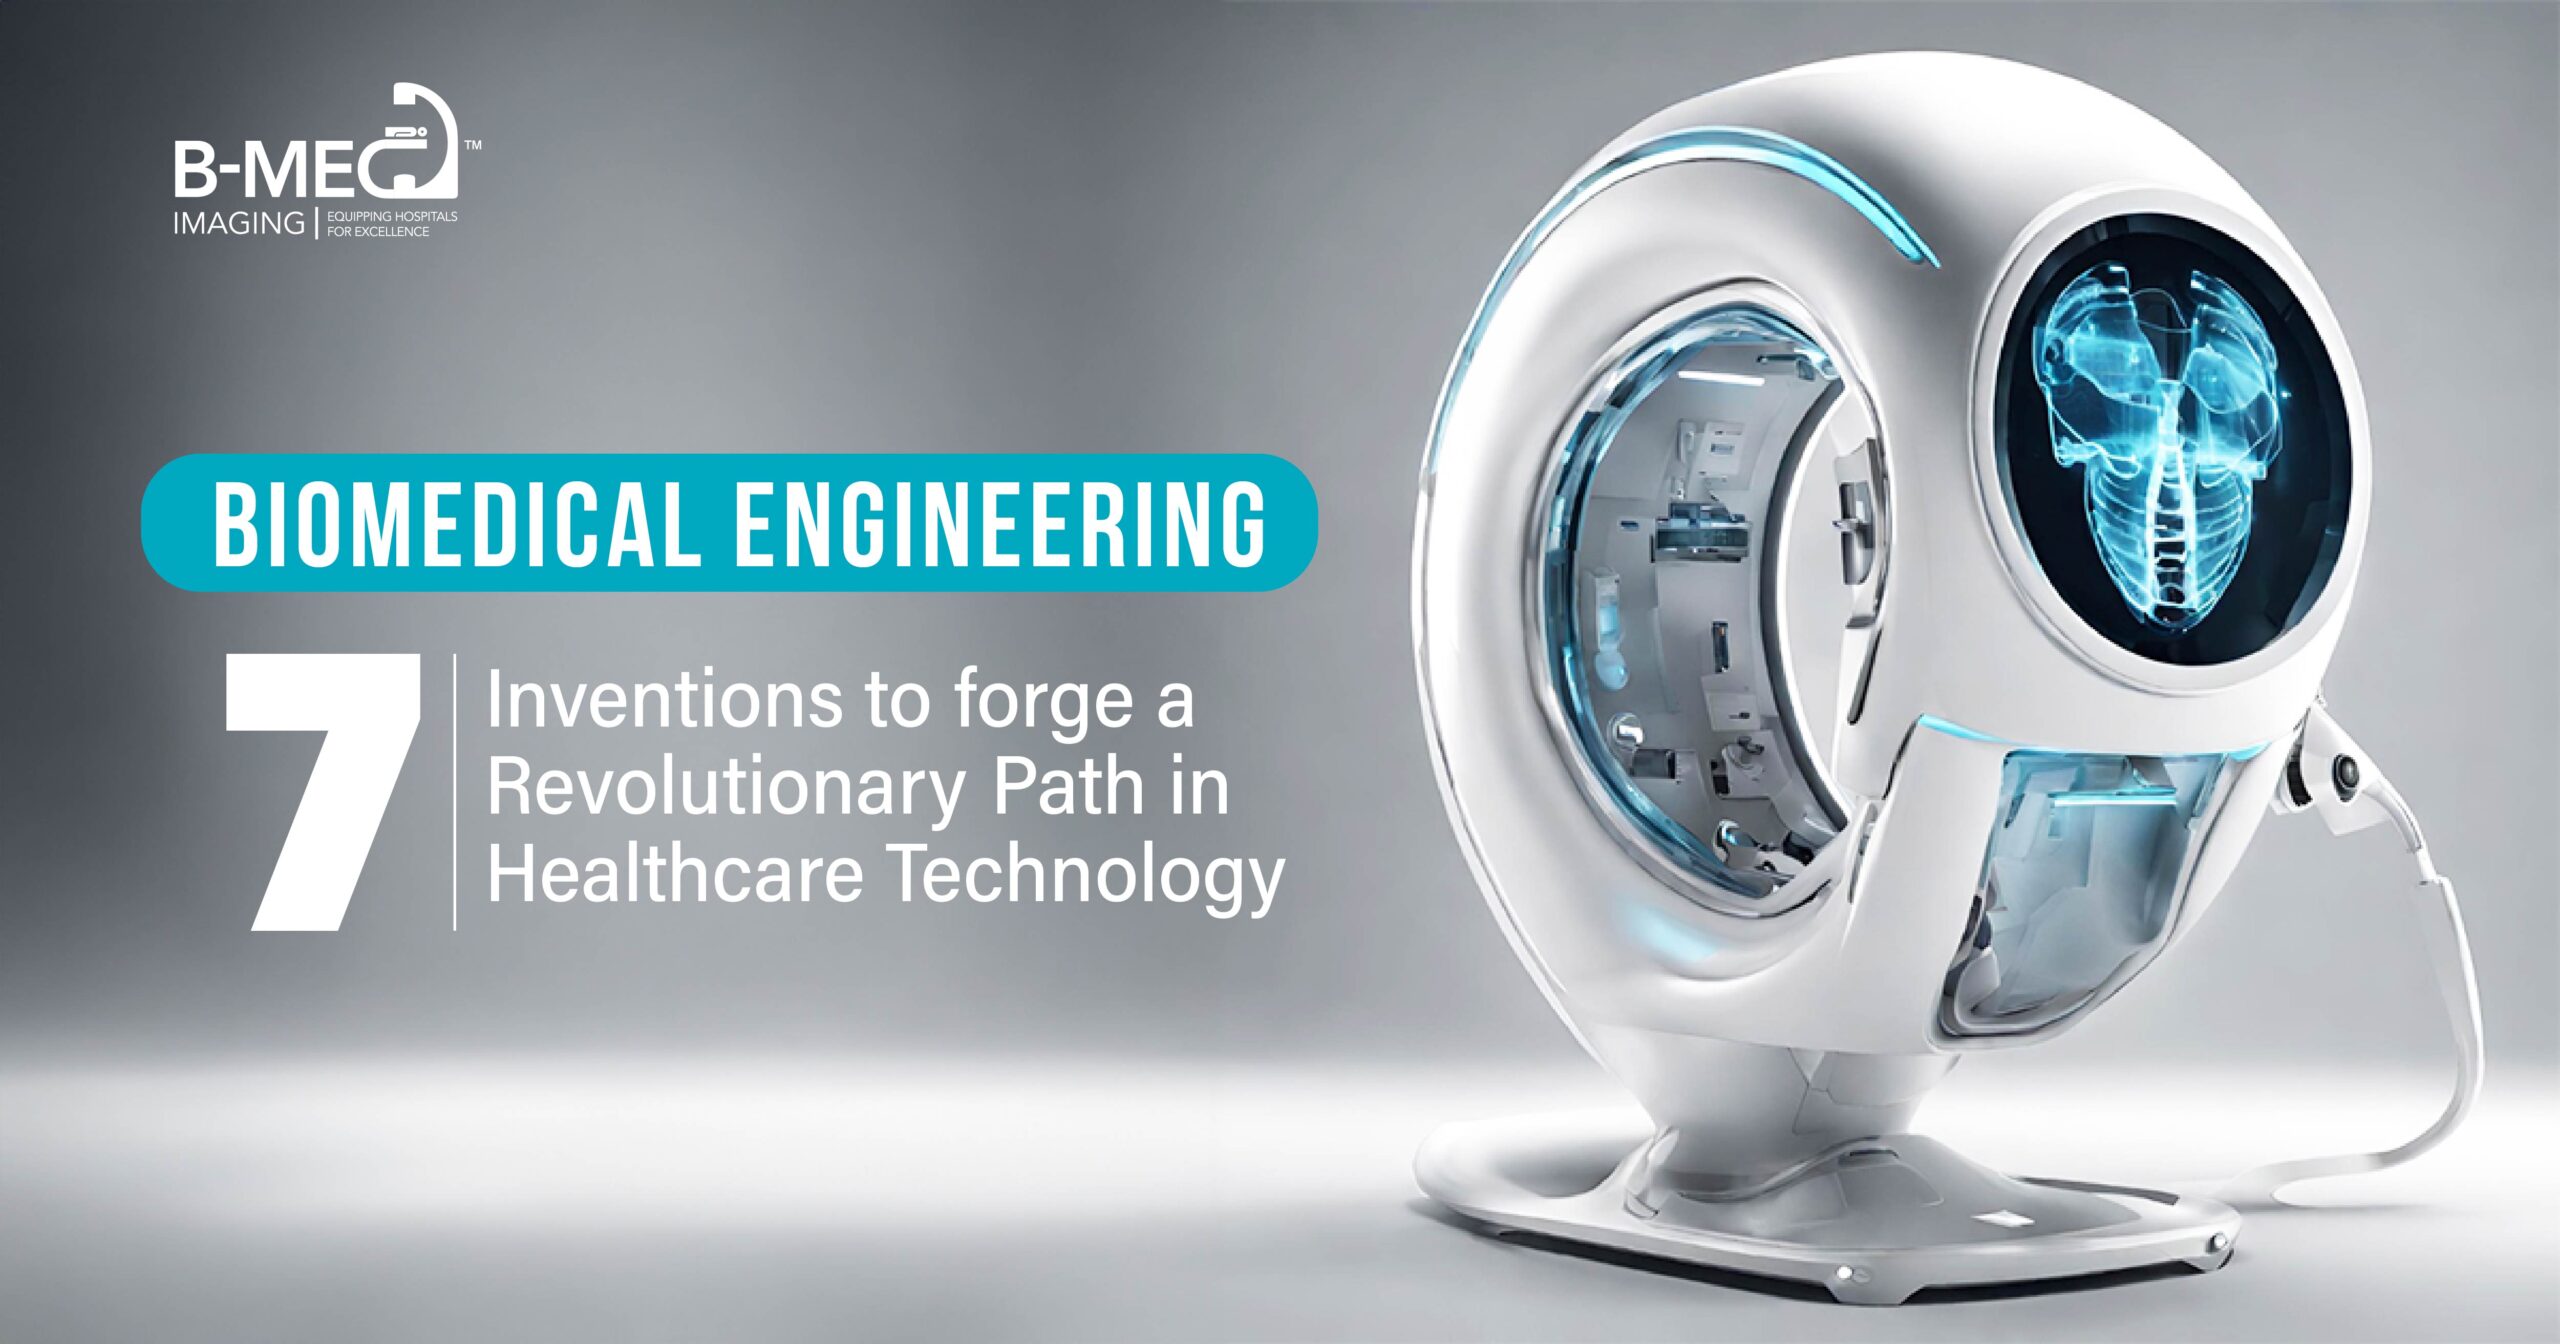 You are currently viewing Biomedical Engineering | 7 Inventions to forge a Revolutionary Path in Healthcare Technology